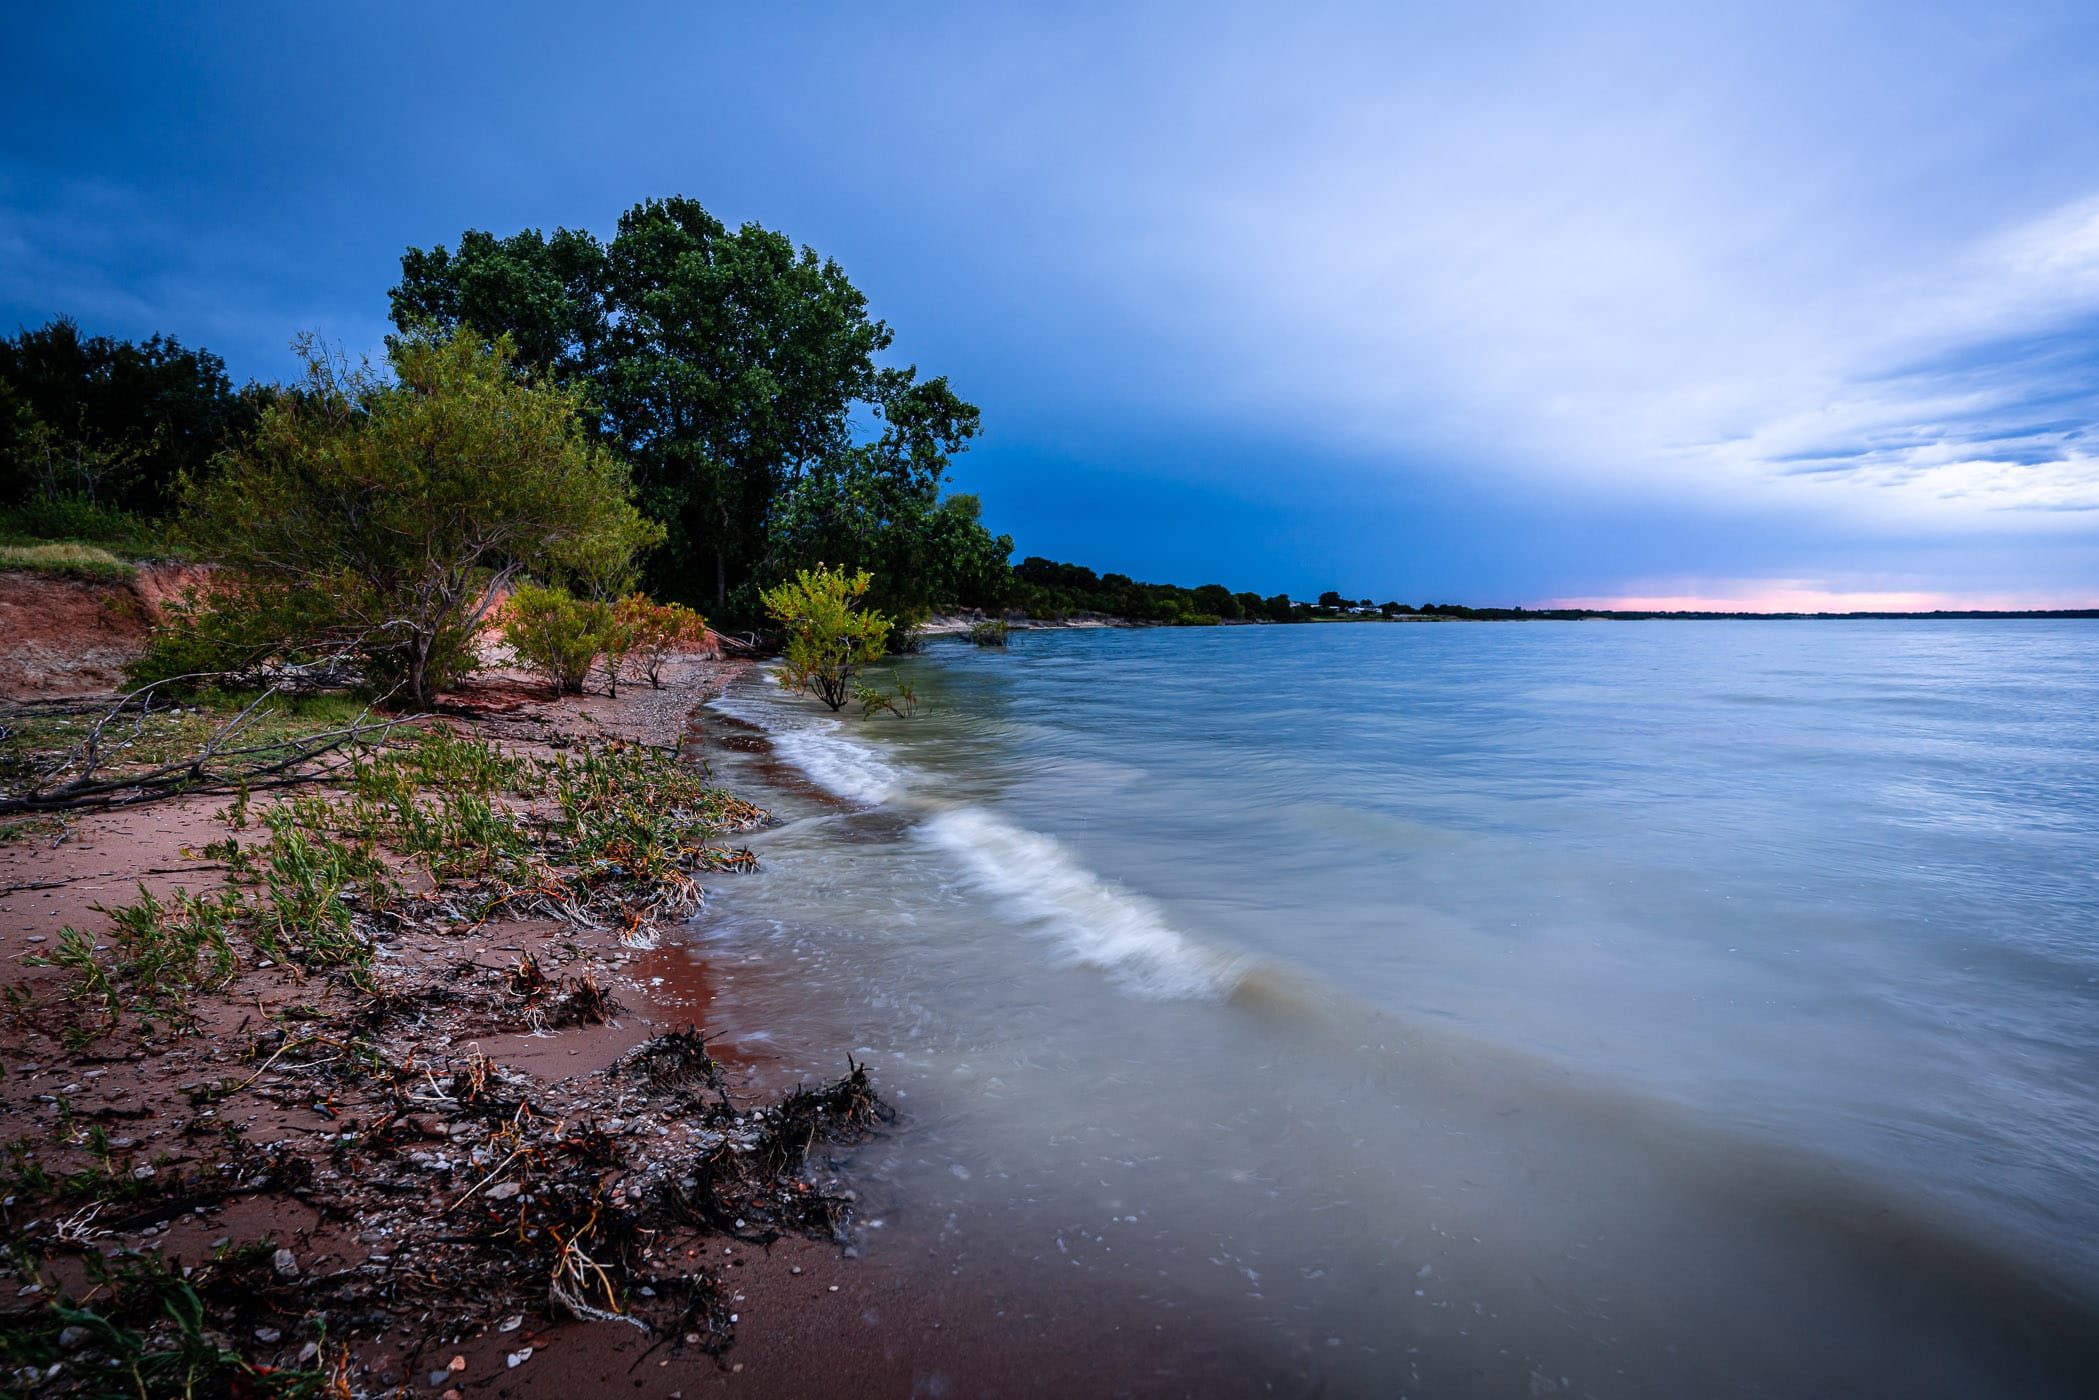 Waves roll onto shore at North Texas' Lake Lavon.